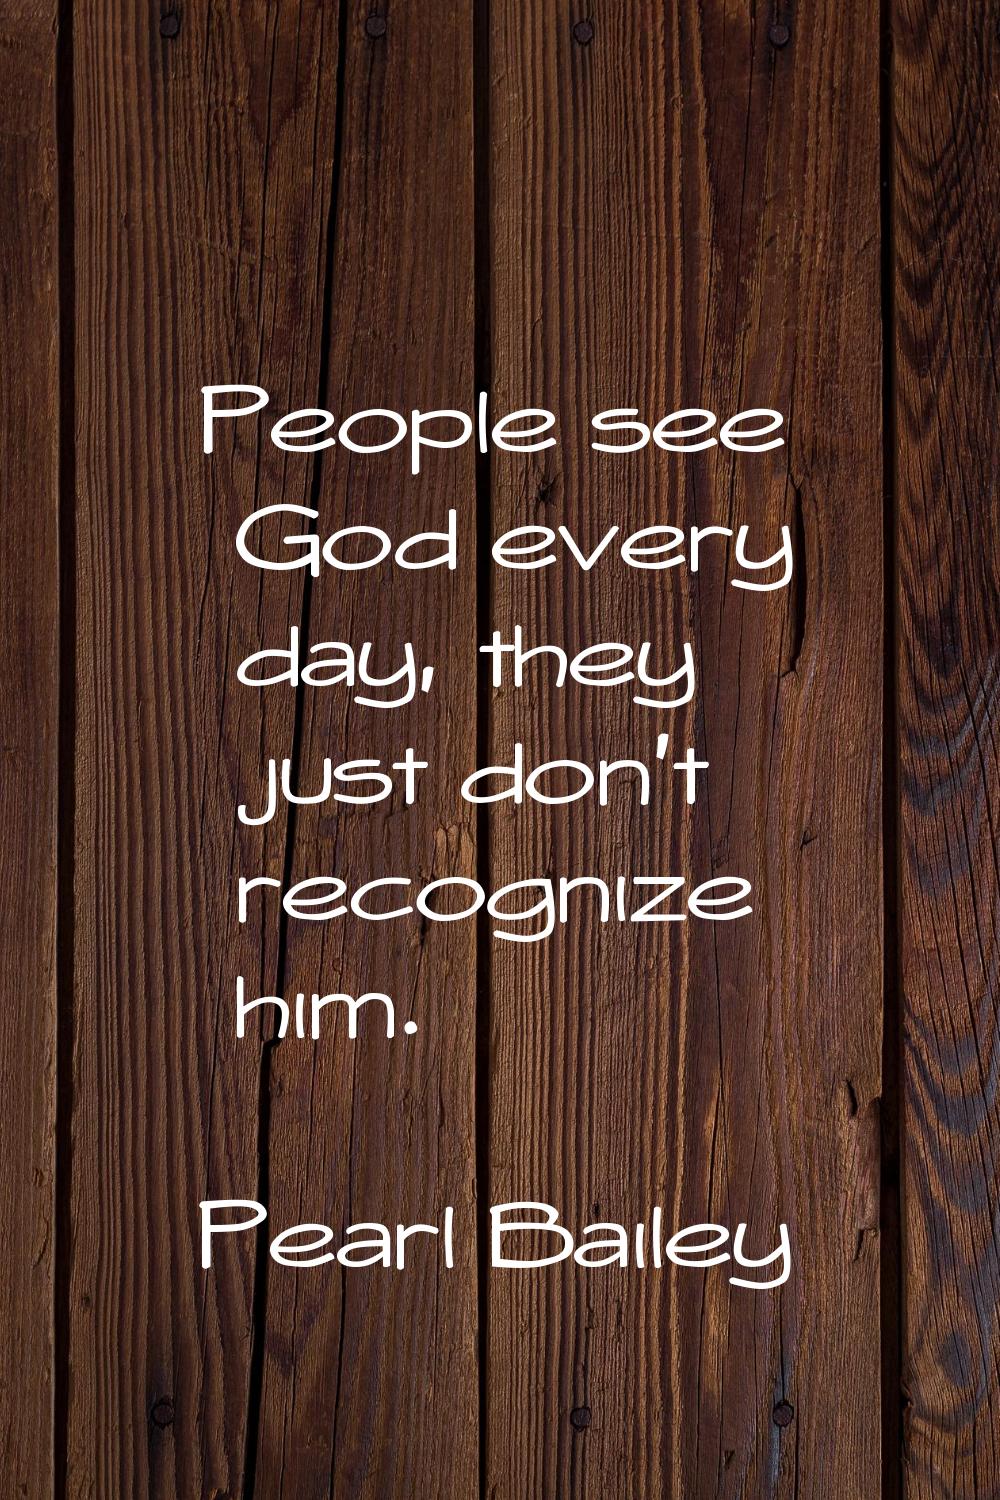 People see God every day, they just don't recognize him.